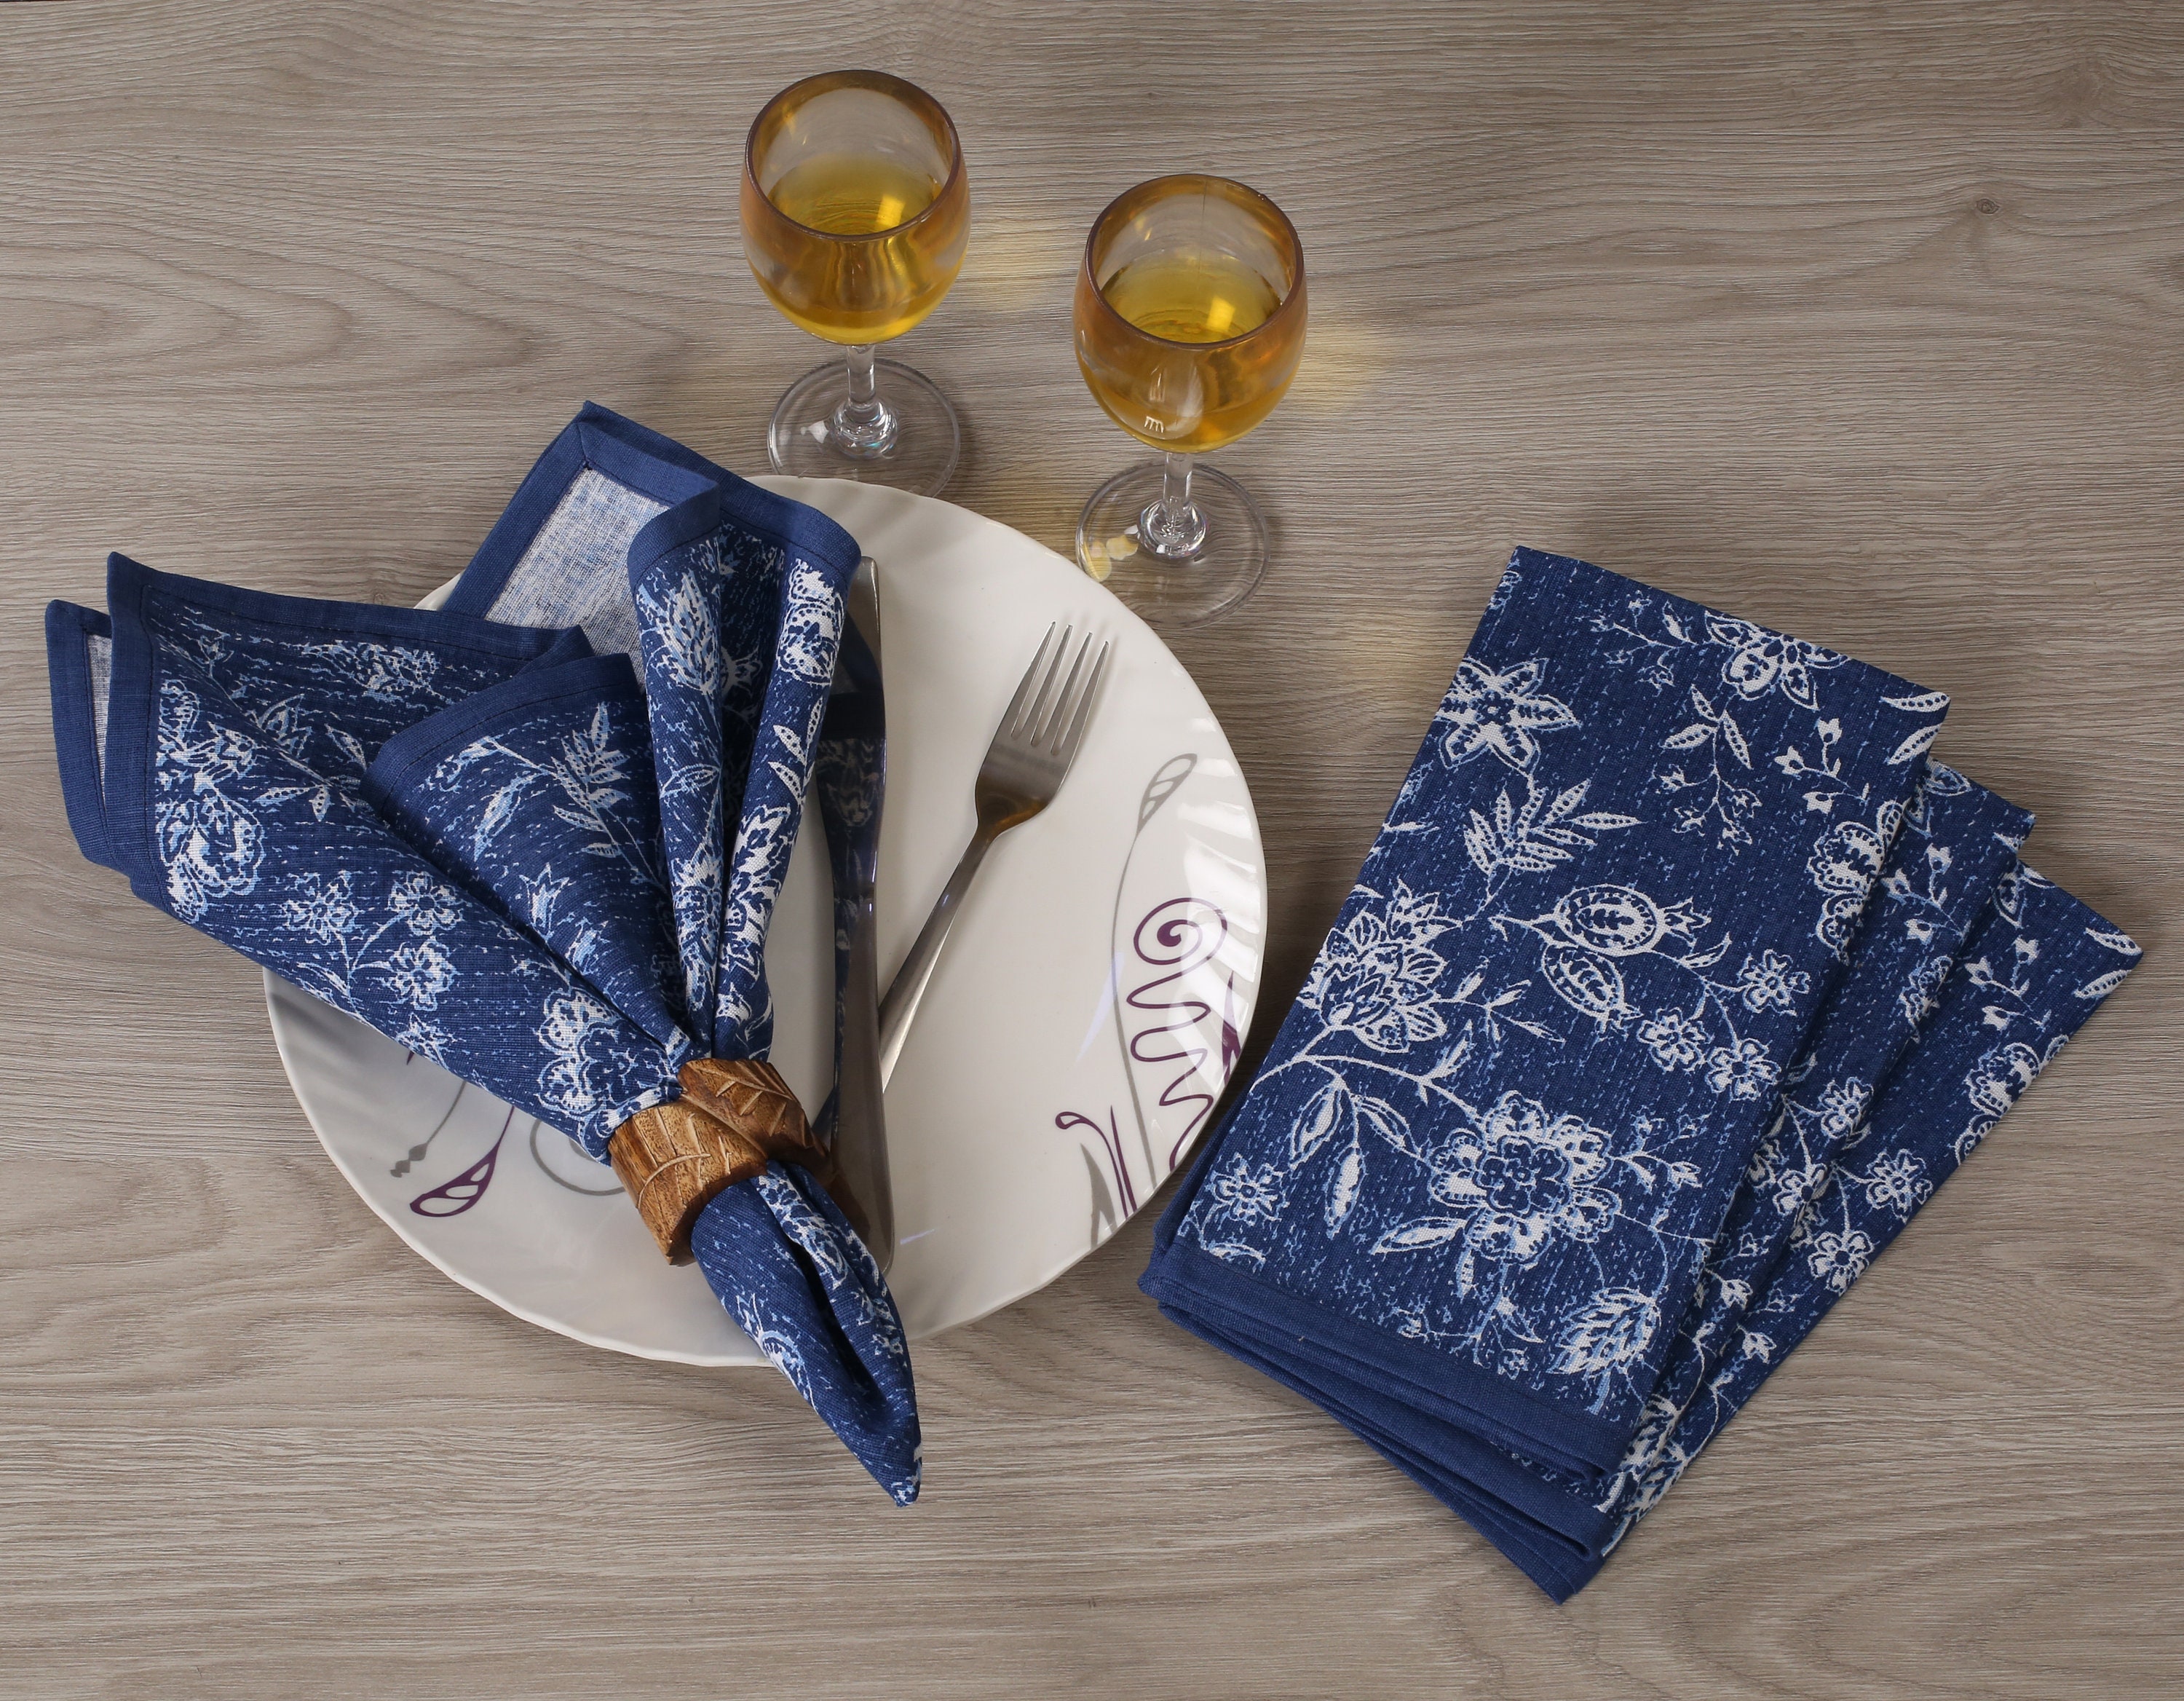 Dinner Napkins, Everyday Use, Premium Quality Cotton Linen Blend Napkins  Set of 6 Perfect for Parties Dinners Weddings Cocktail Christmas Napkins